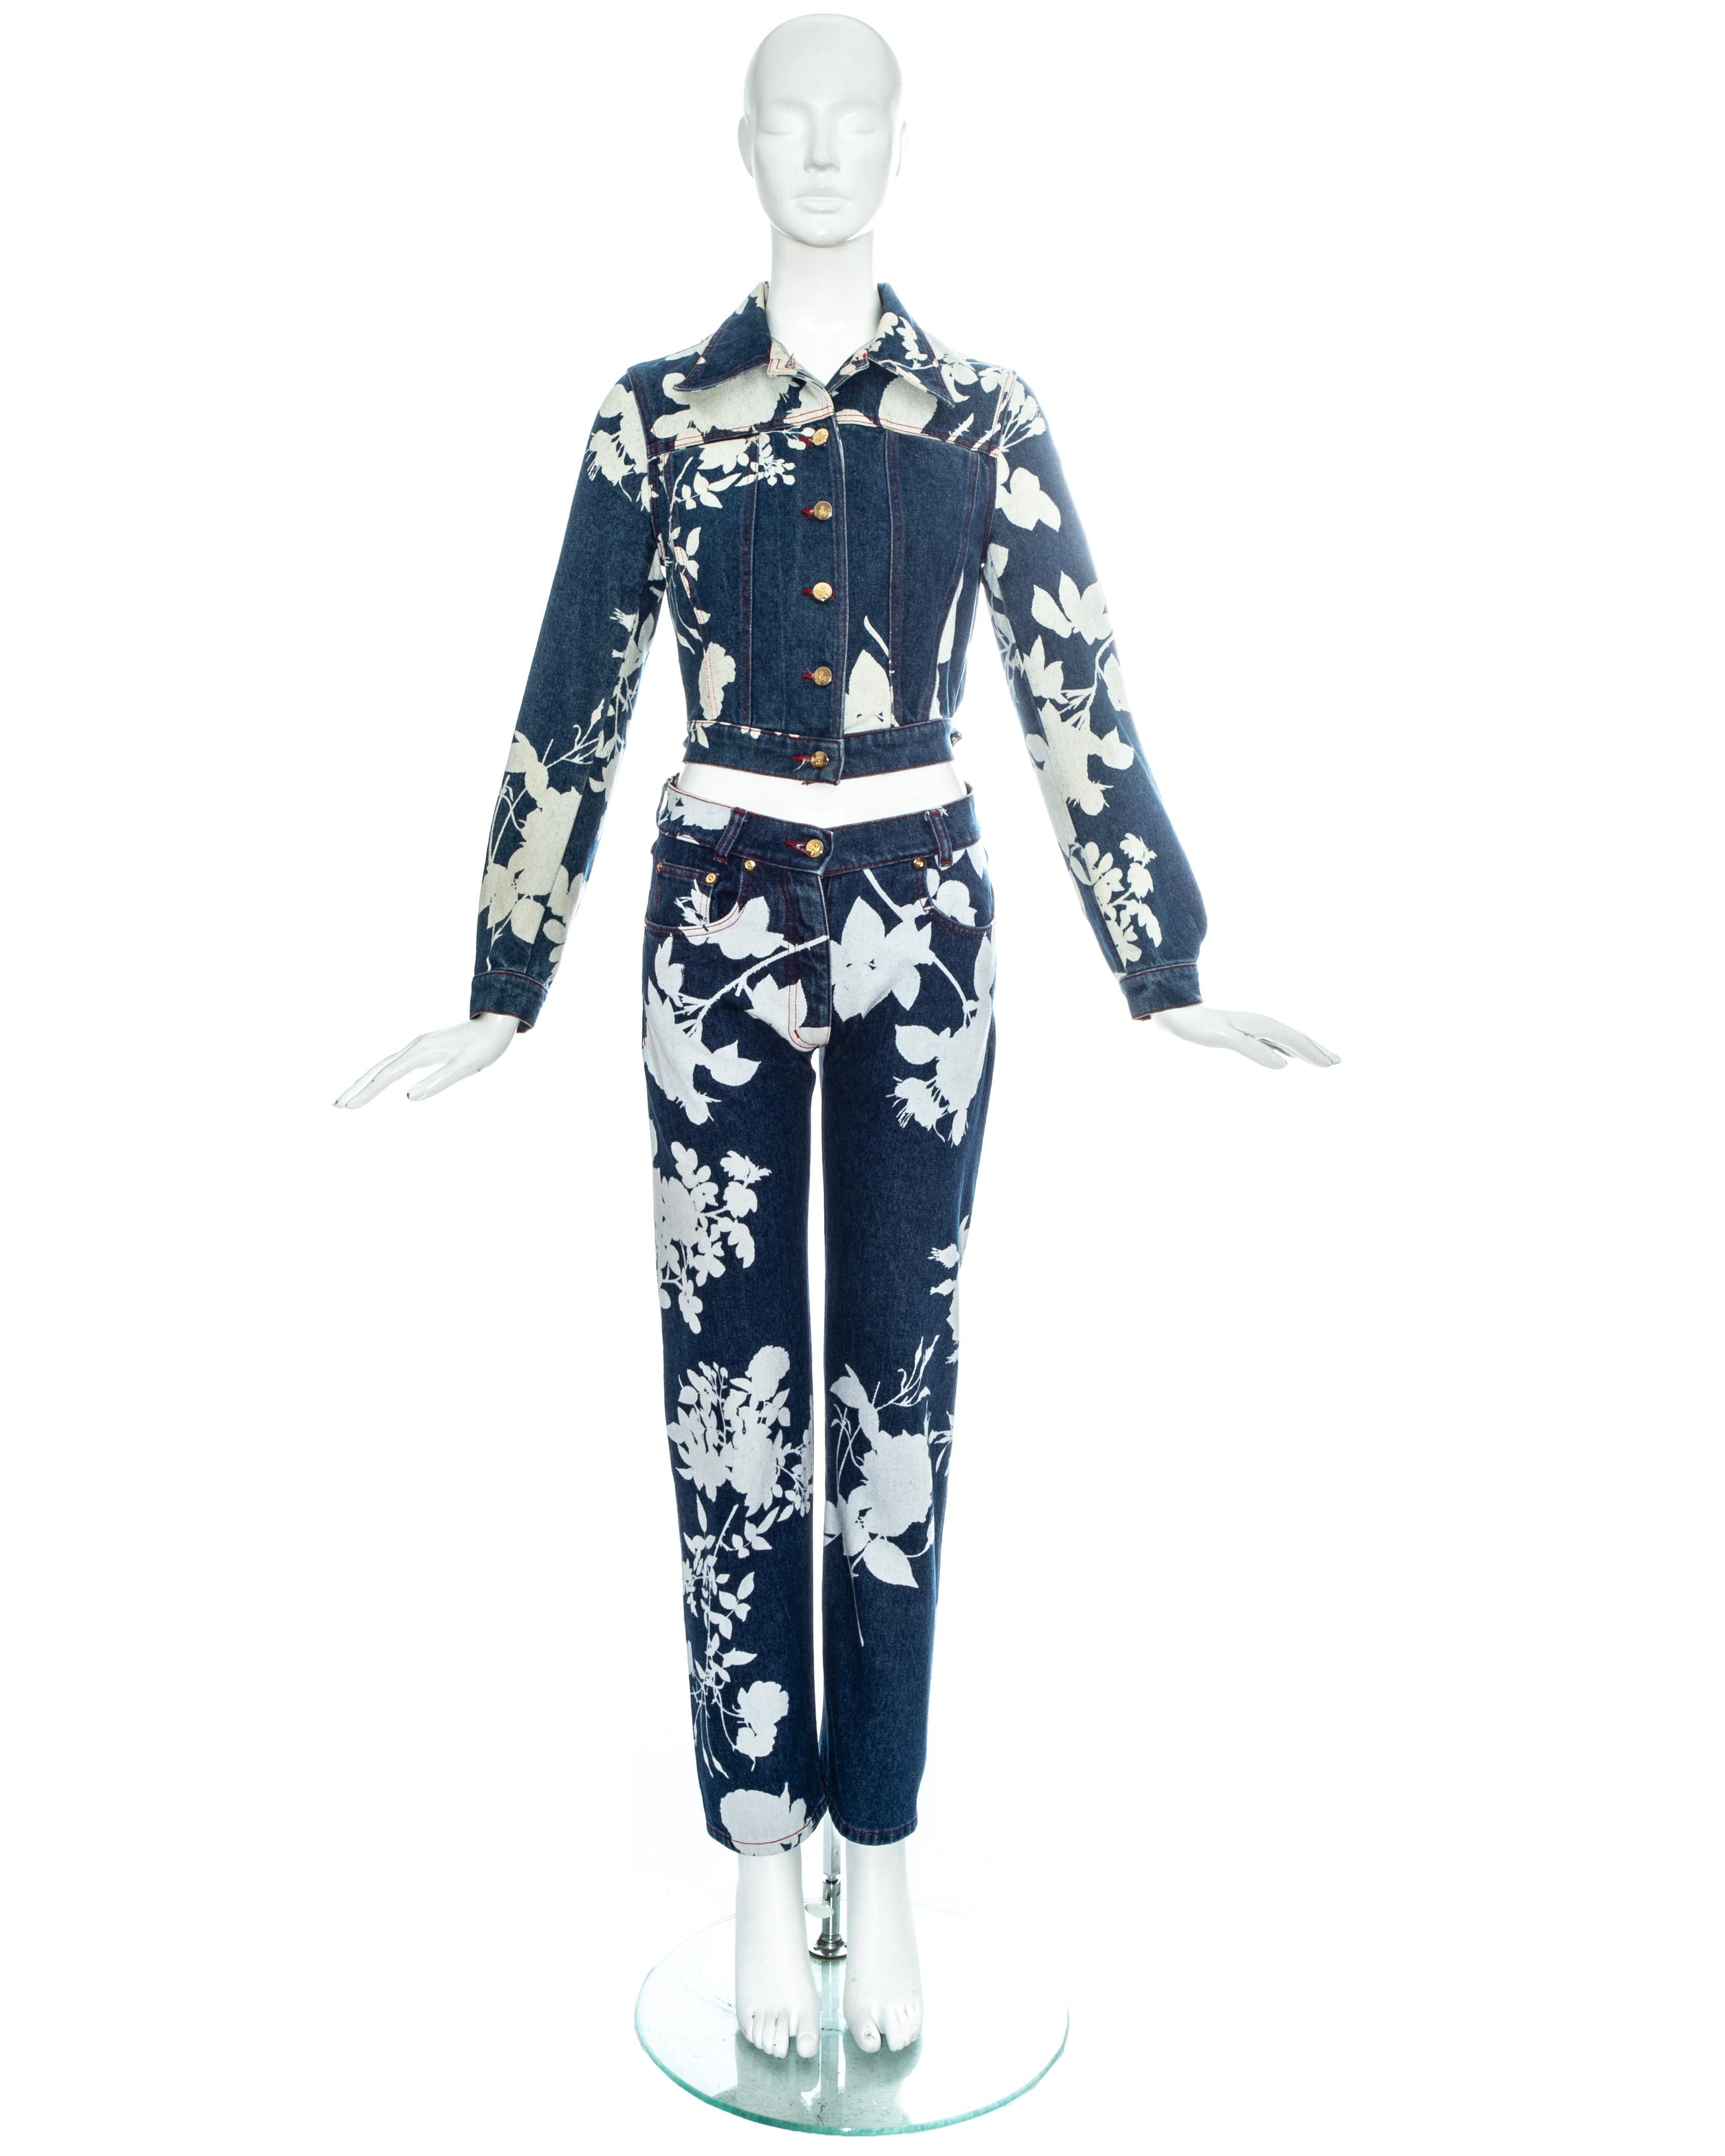 Vivienne Westwood blue denim pant suit with bleached abstract floral print. Fitted cropped denim jacket and high waisted slim fit jeans.

'Cafe Society', Spring-Summer 1994